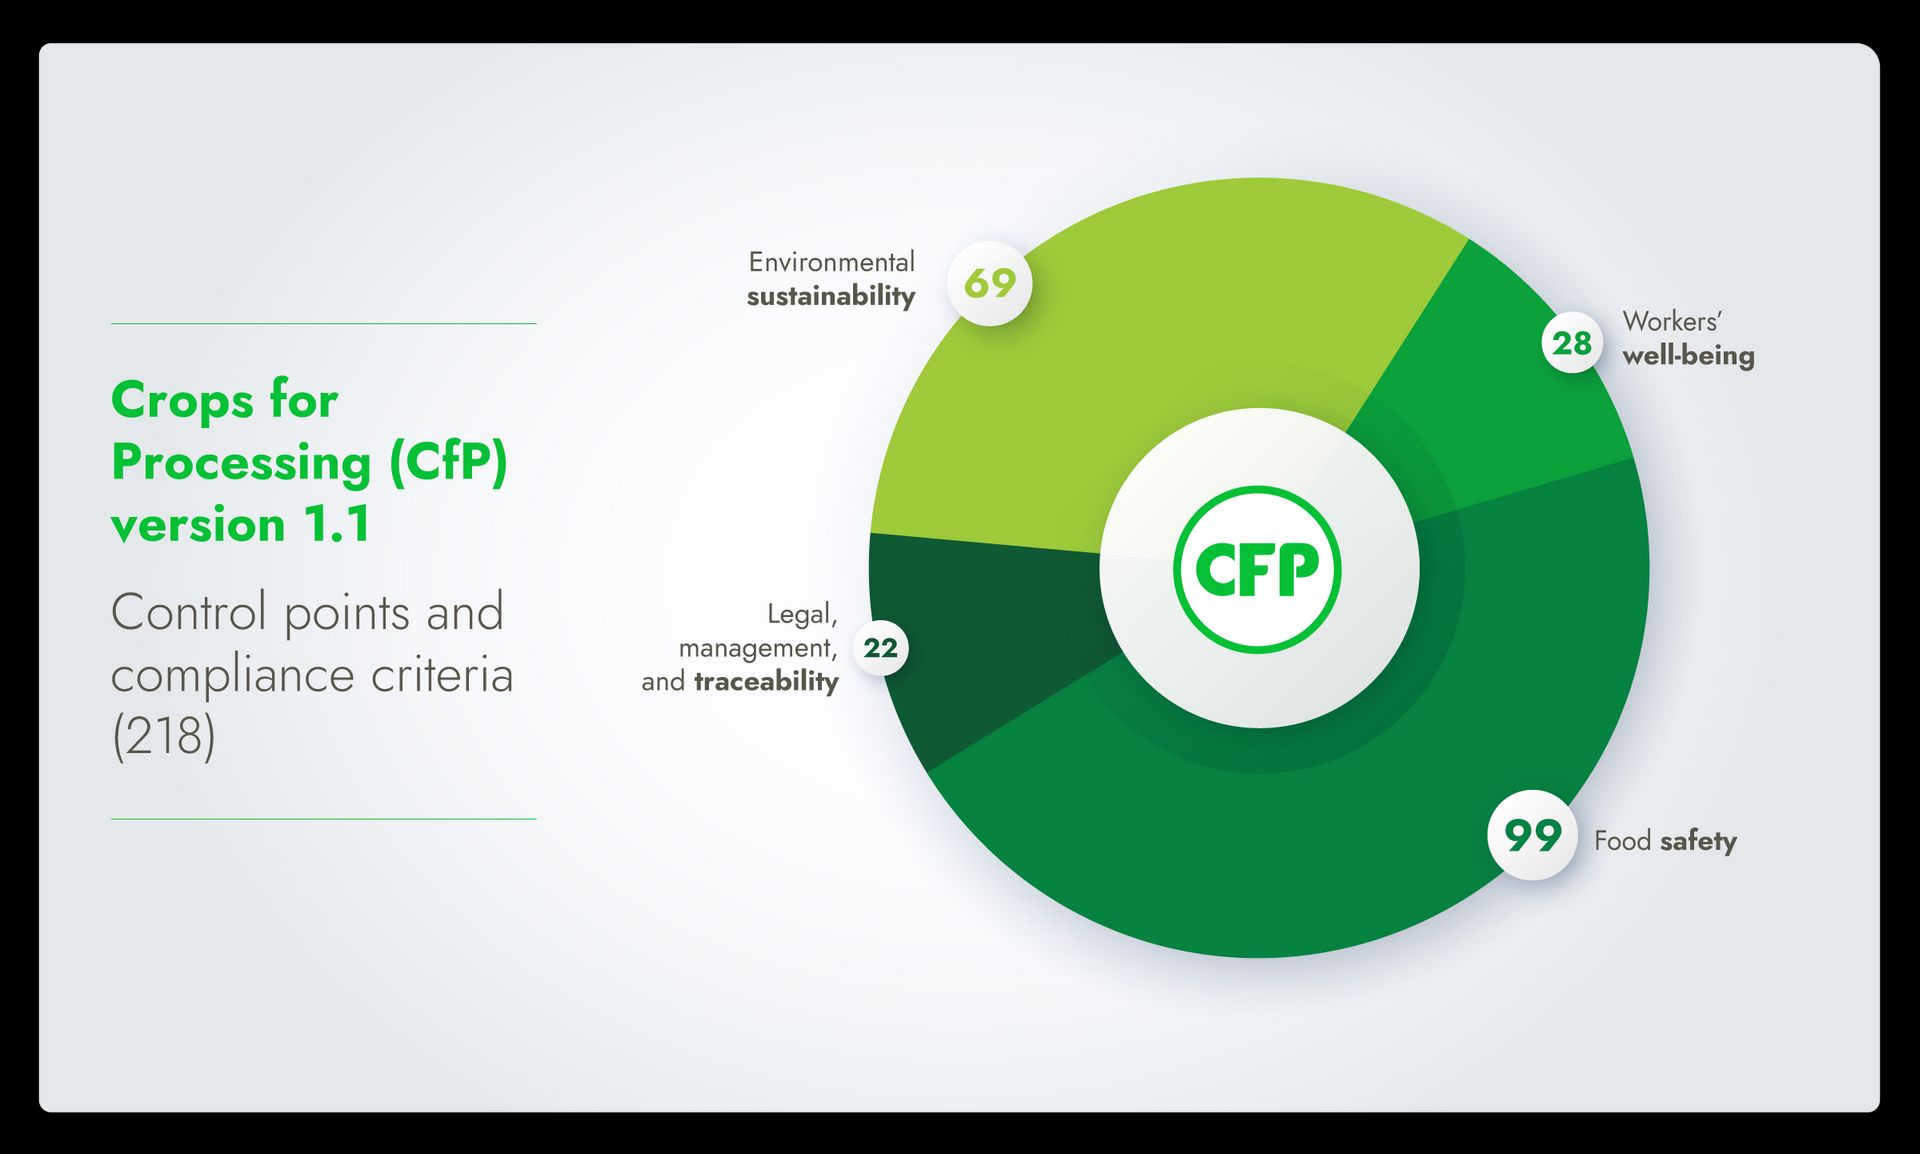 Infographic showing the breakdown of control points and compliance criteria of Crops for Processing version 1.1